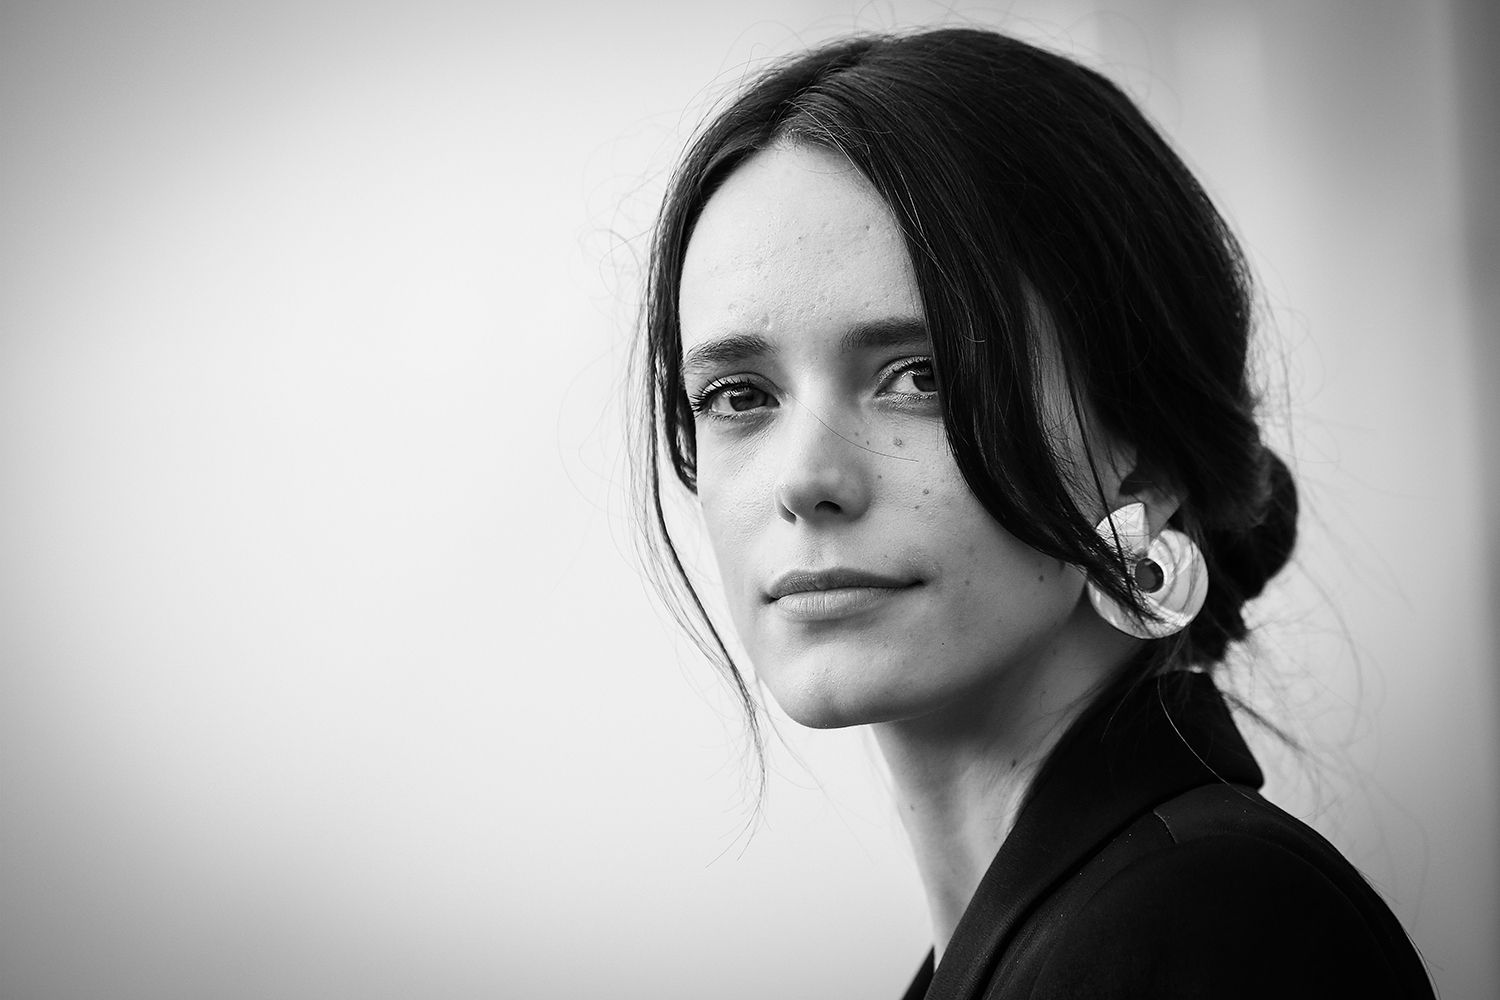 Stacy Martin “Sexualised female bodies have become normalised”